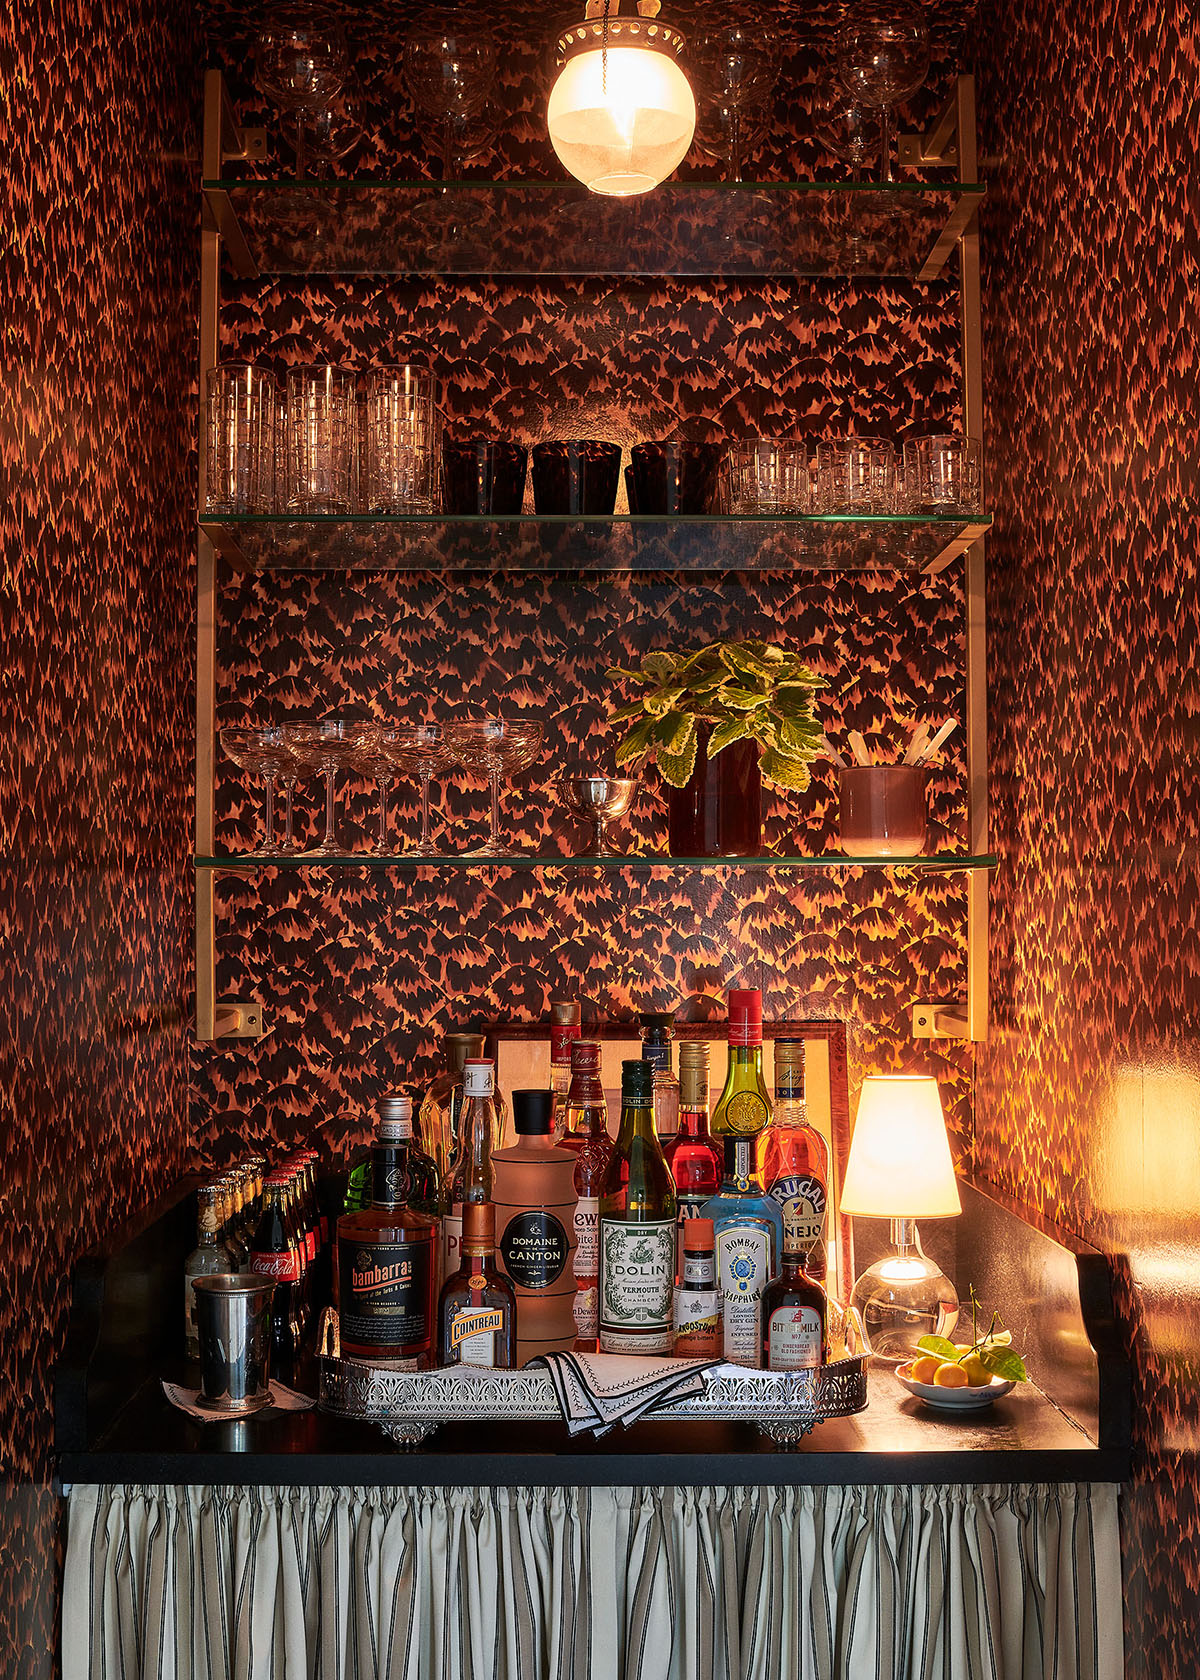 Home bar  in Arkansas Home by Heather Chadduck in Veranda Magazine by Alison Gootee photography